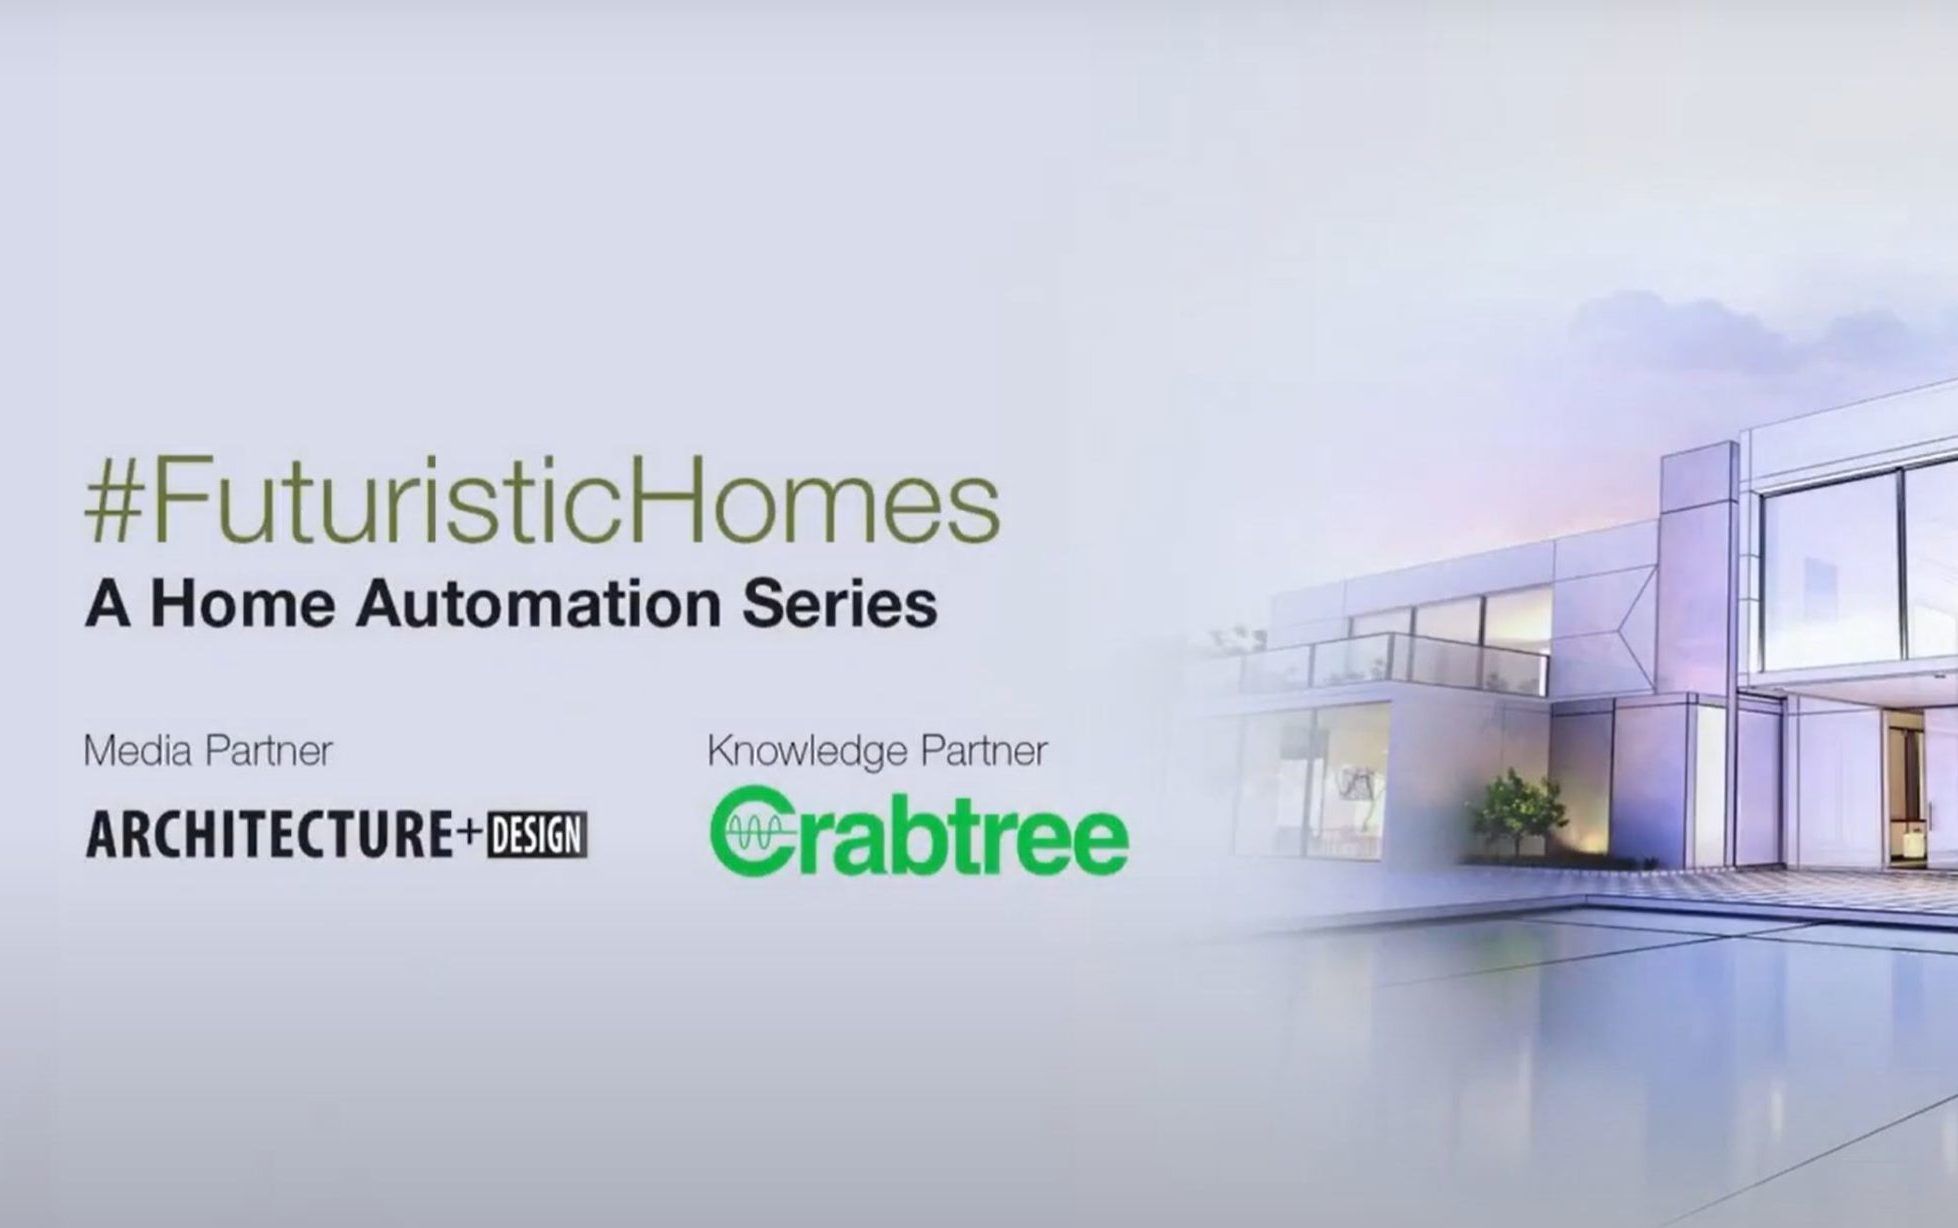 Architecture+Design India In Partnership with Crabtree Presents #FuturisticHomes, a Home Automation Series.